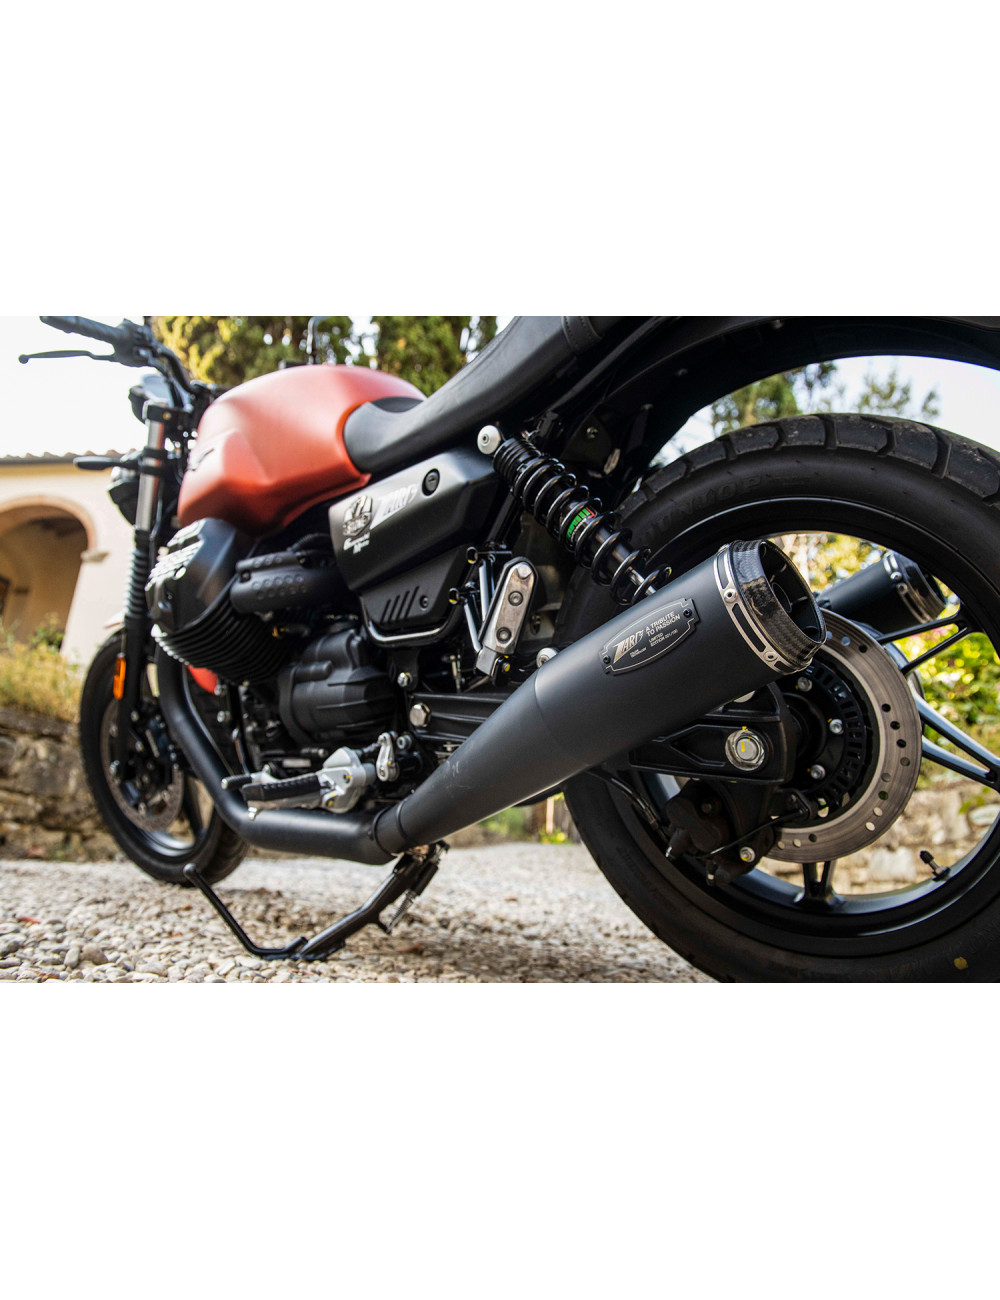 Moto Guzzi V7 850 21-23 Limited Edition Approved Stainless Steel Silencers